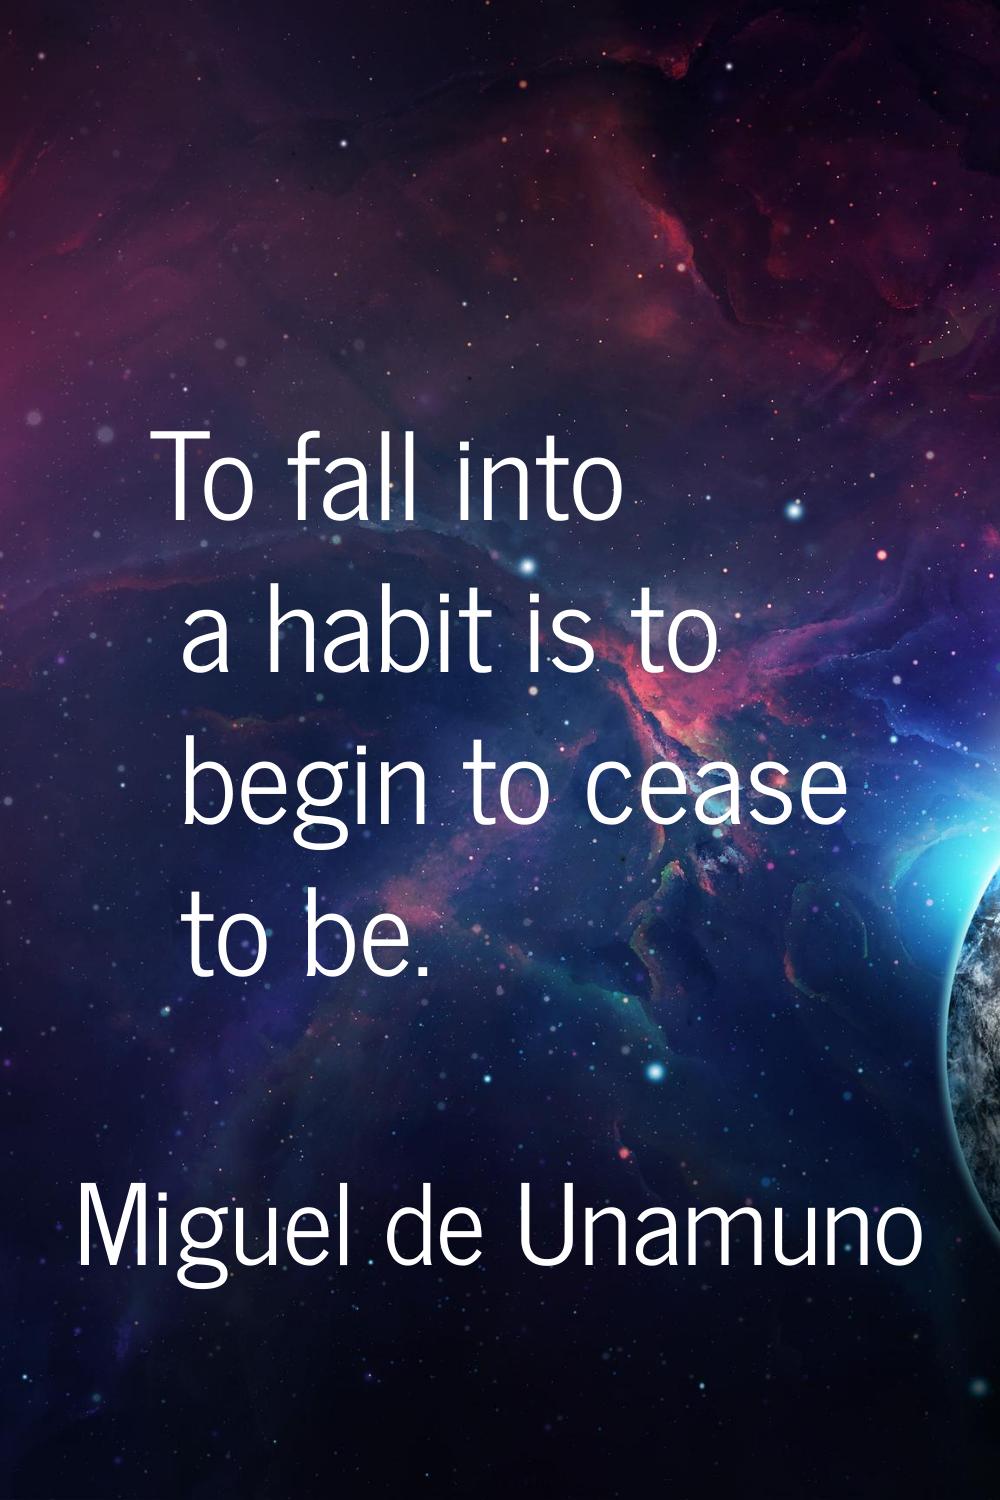 To fall into a habit is to begin to cease to be.